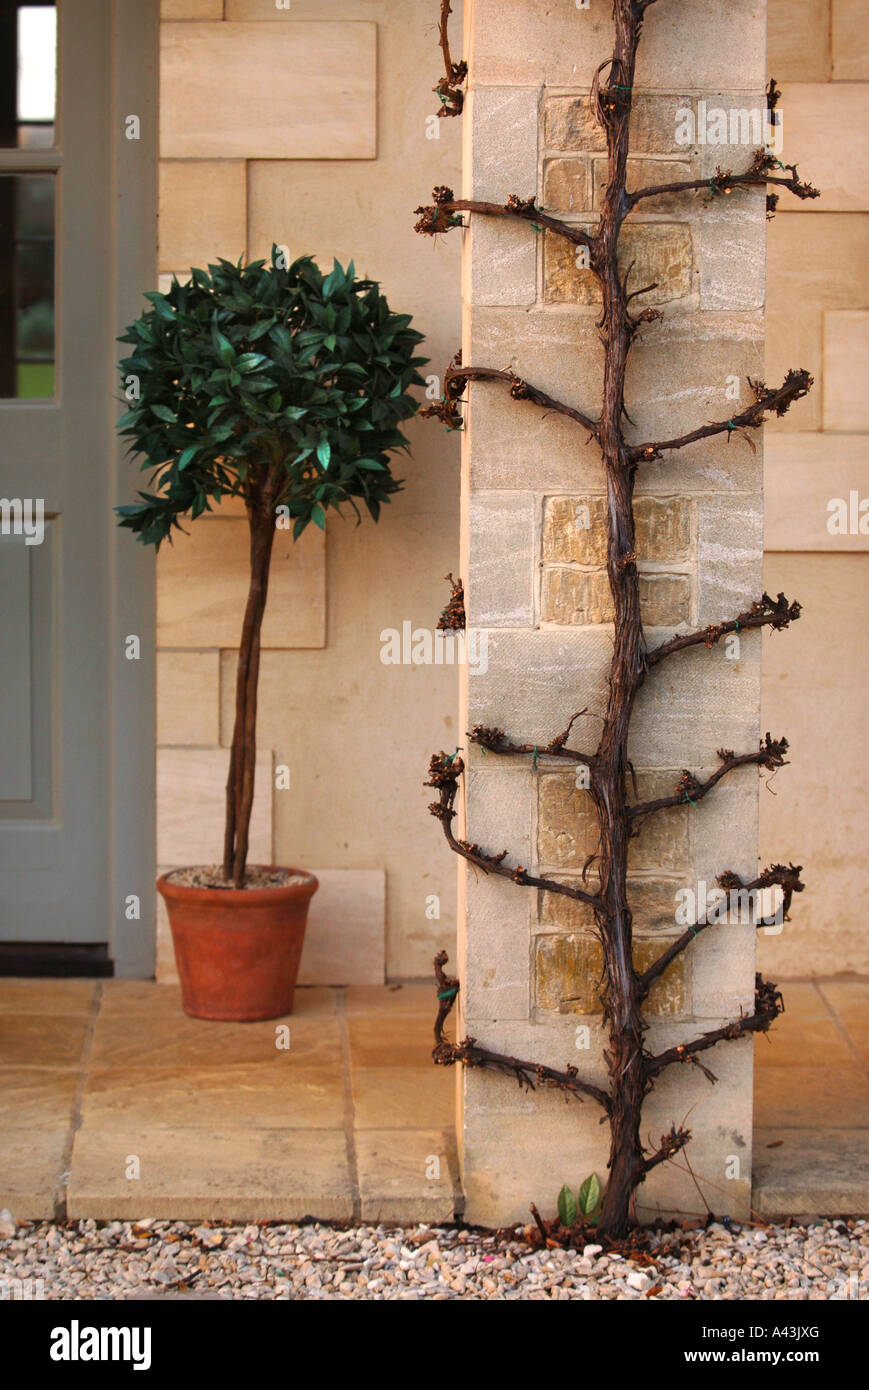 A BAY TREE IN THE PORCH OF A LUXURY BED AND BREAKFAST APARTMENT PART OF A CONVERTED STABLE BLOCK UK Stock Photo